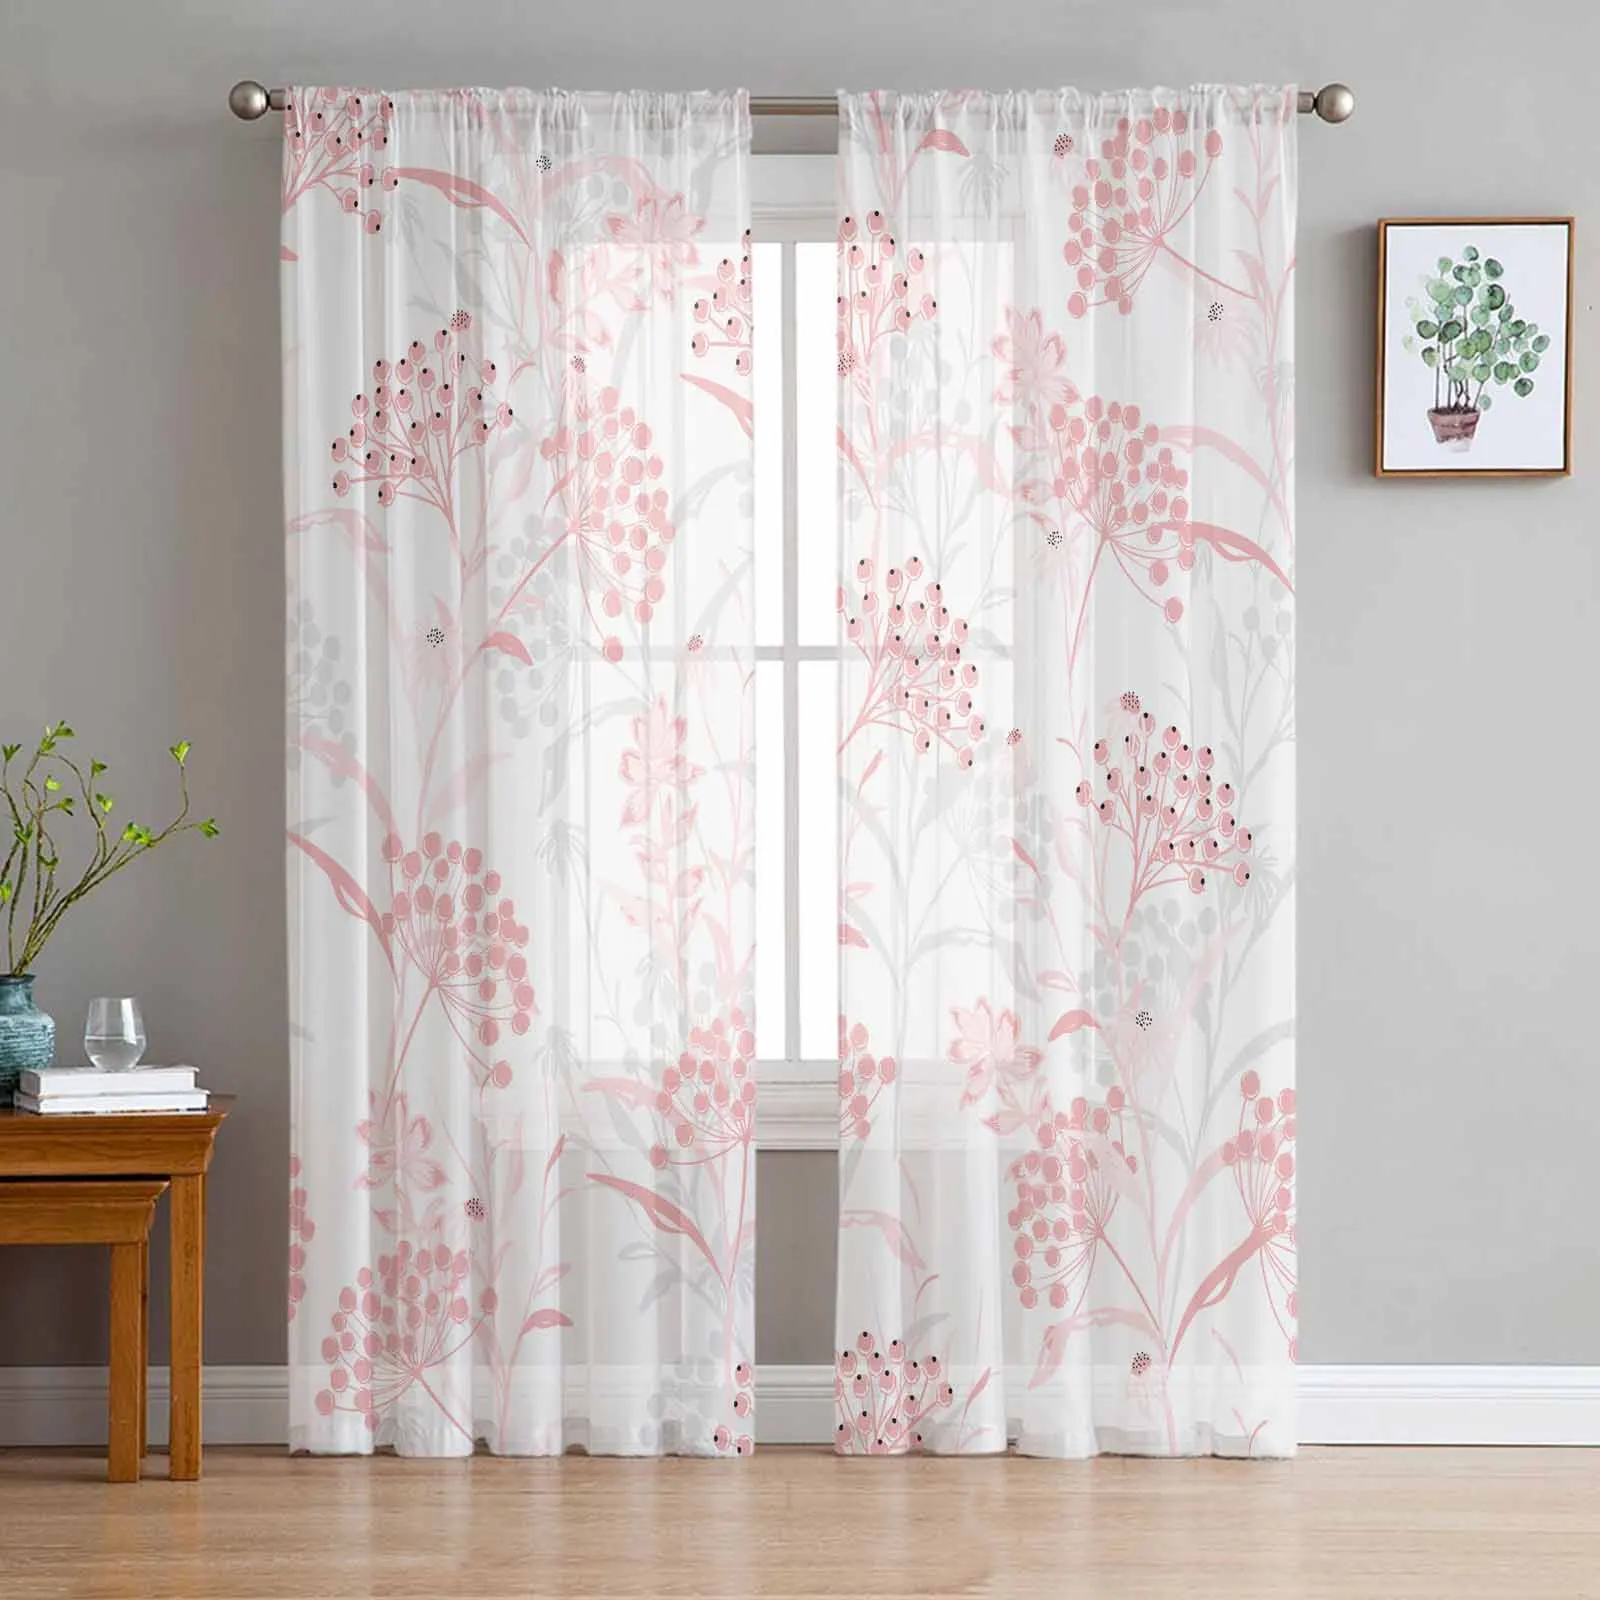 

Plant Texture Fruit Pink Tulle Sheer Curtain Living Room Adults Bedroom Drapes Kitchen Voile Organza Decor Curtains